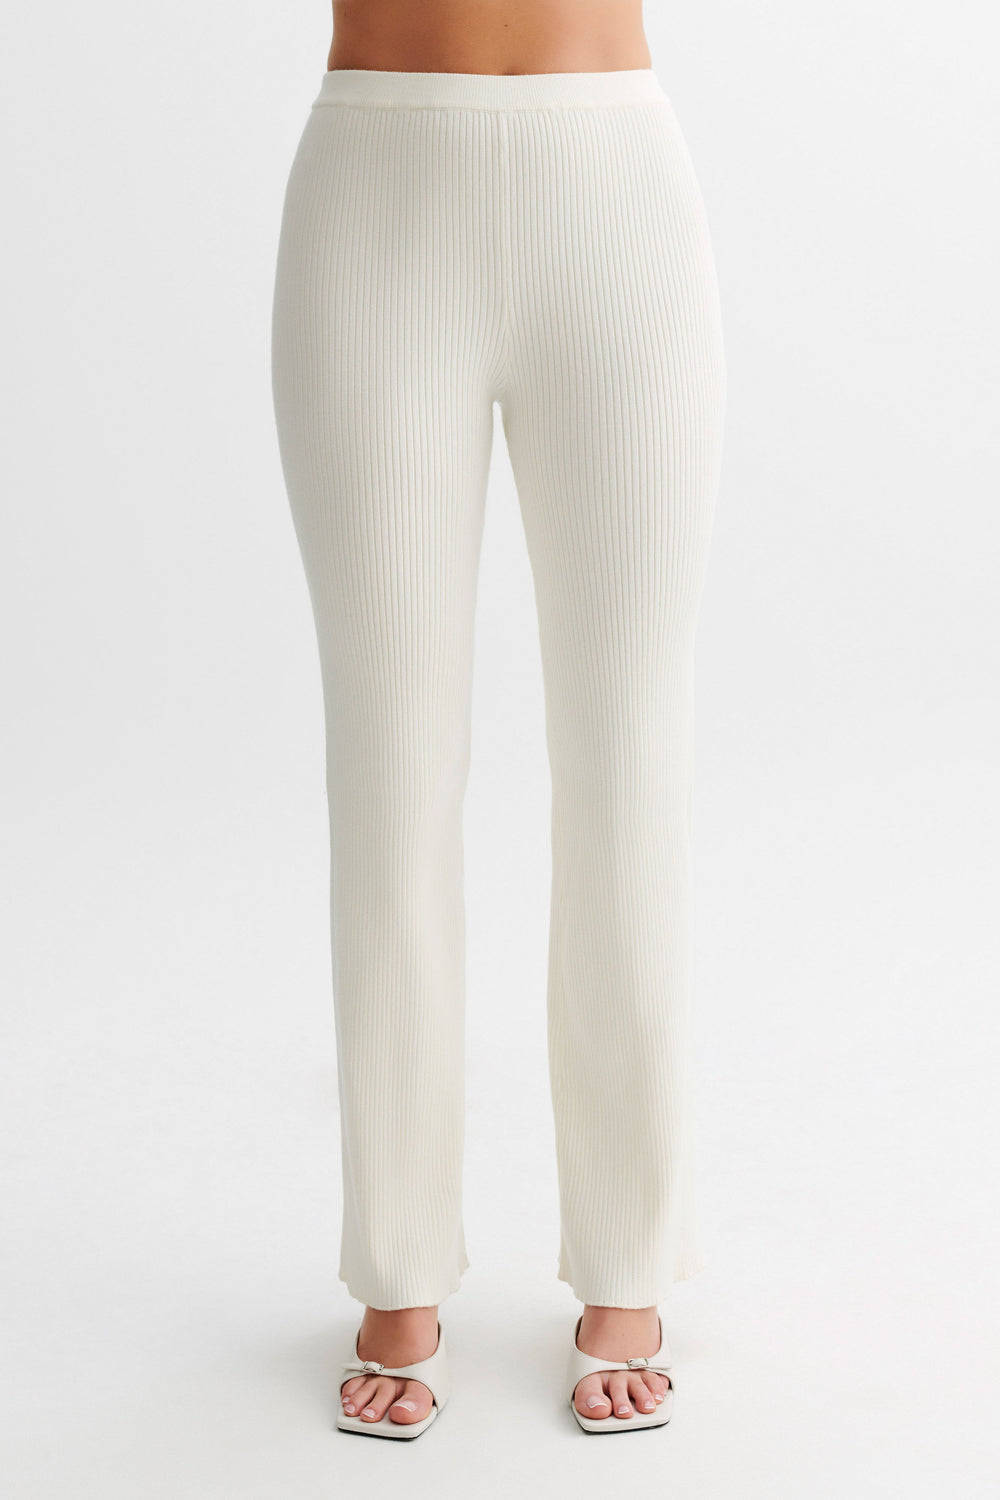 Calypso Knit Trousers - Ivory